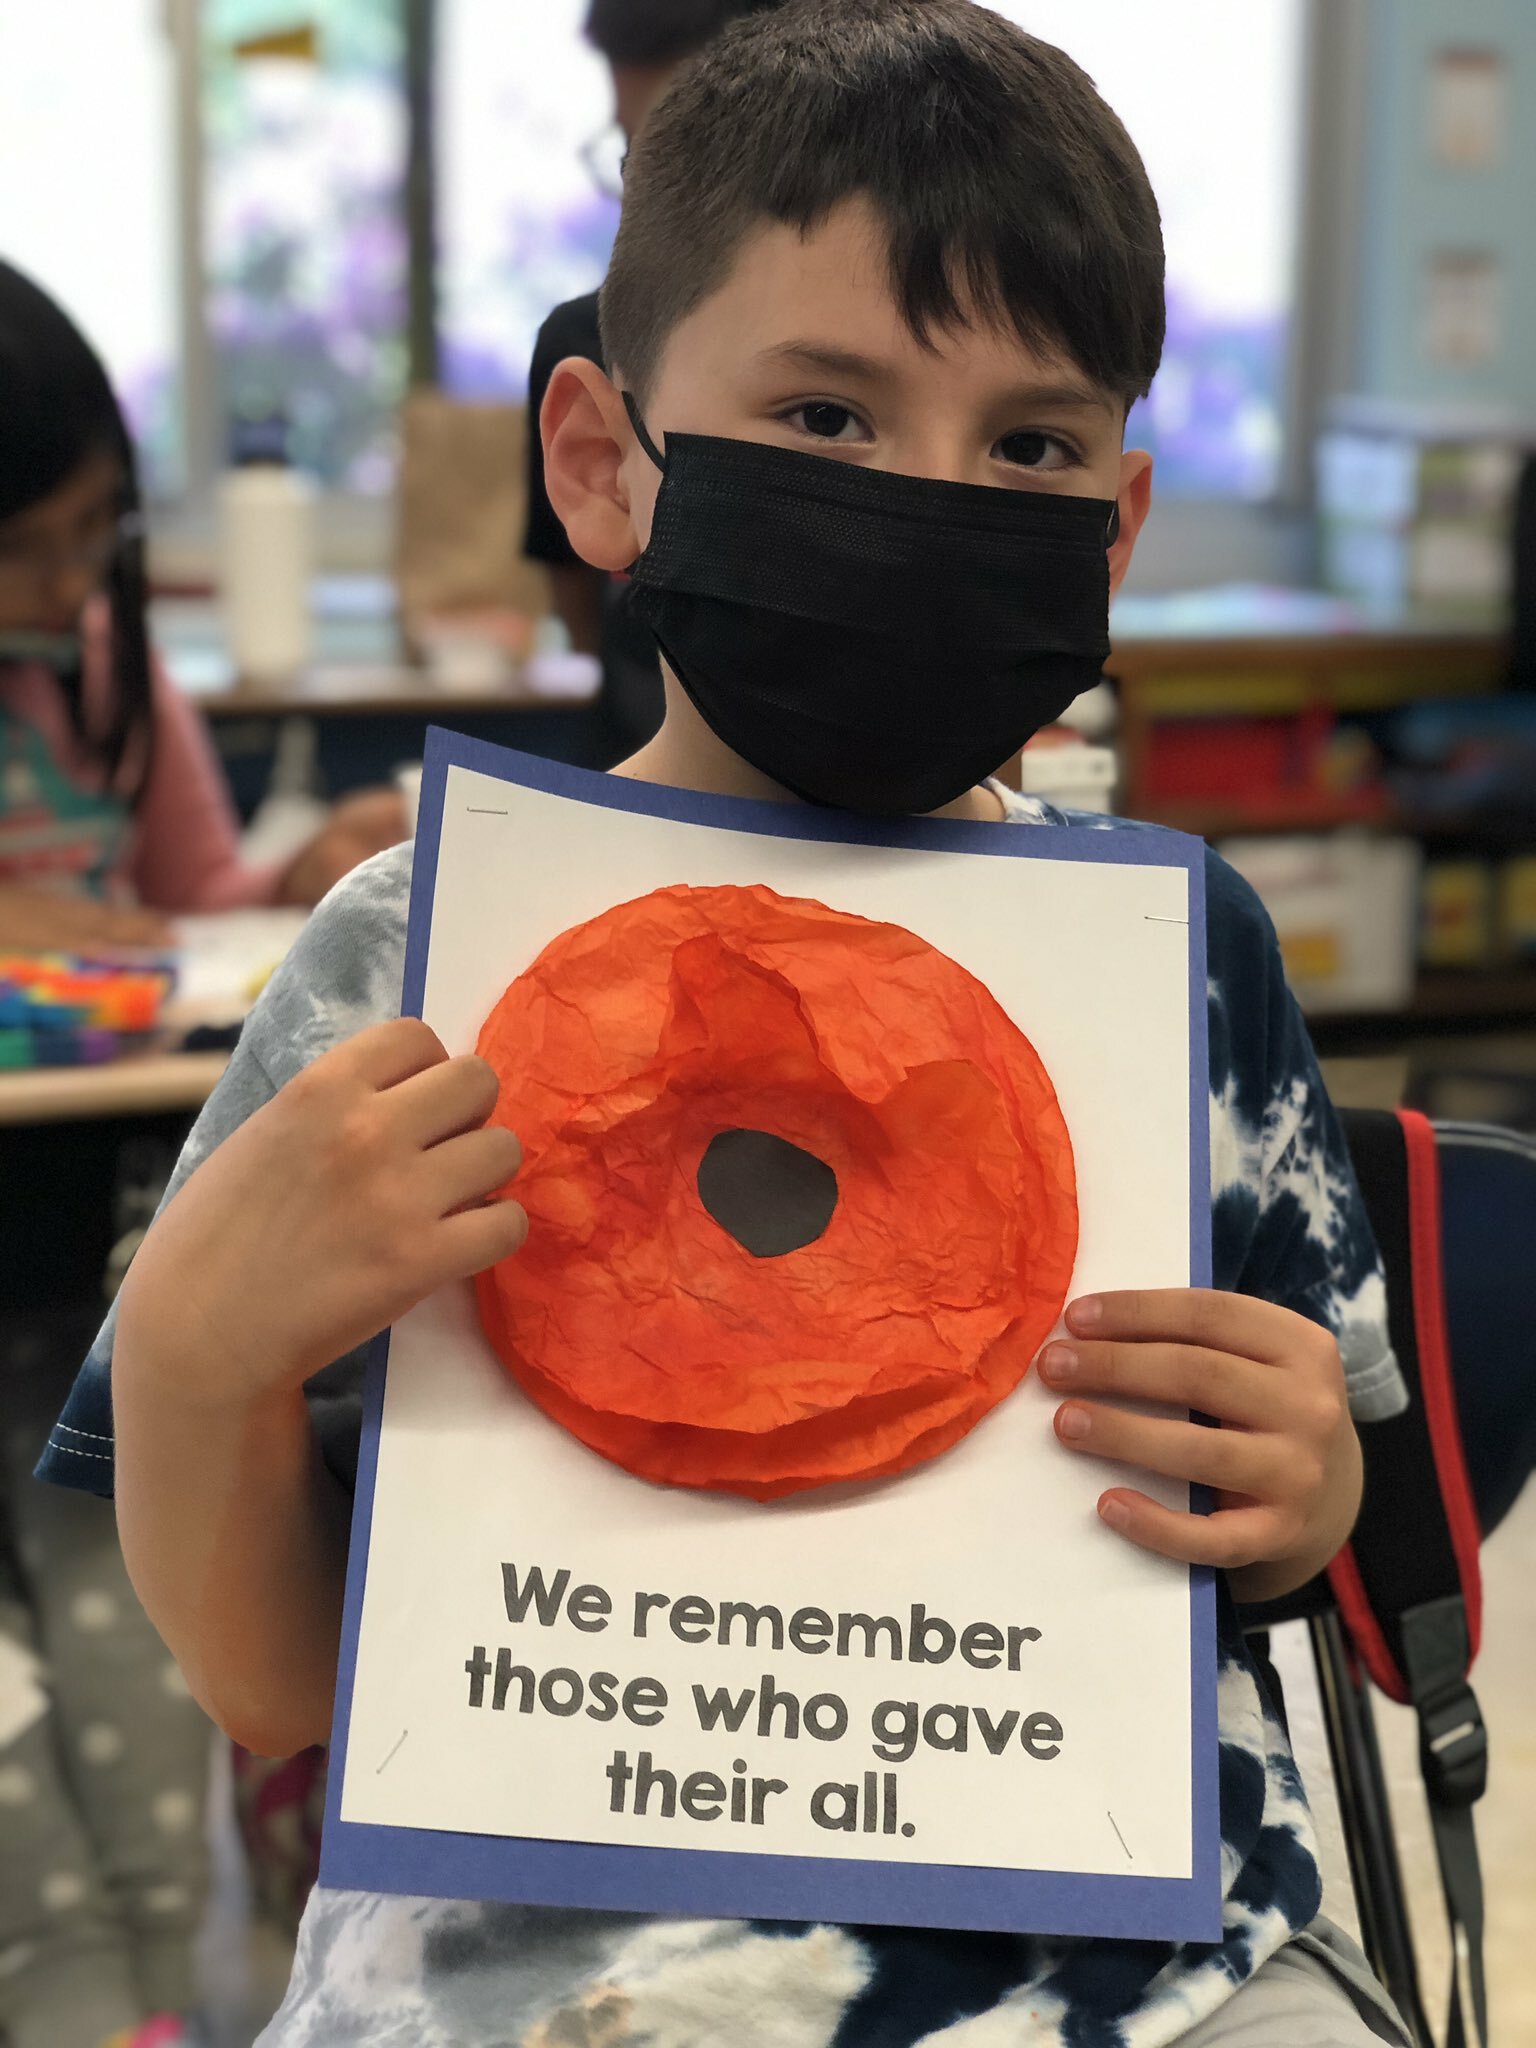 Hampton Bays Elementary School students recently learned more about Memorial Day and honoring those who served. In addition to the lessons, Erin McDermott’s second grade class made red paper poppies, while Lauren Mikelinich’s first graders designed red, white and blue paper plate wreaths.